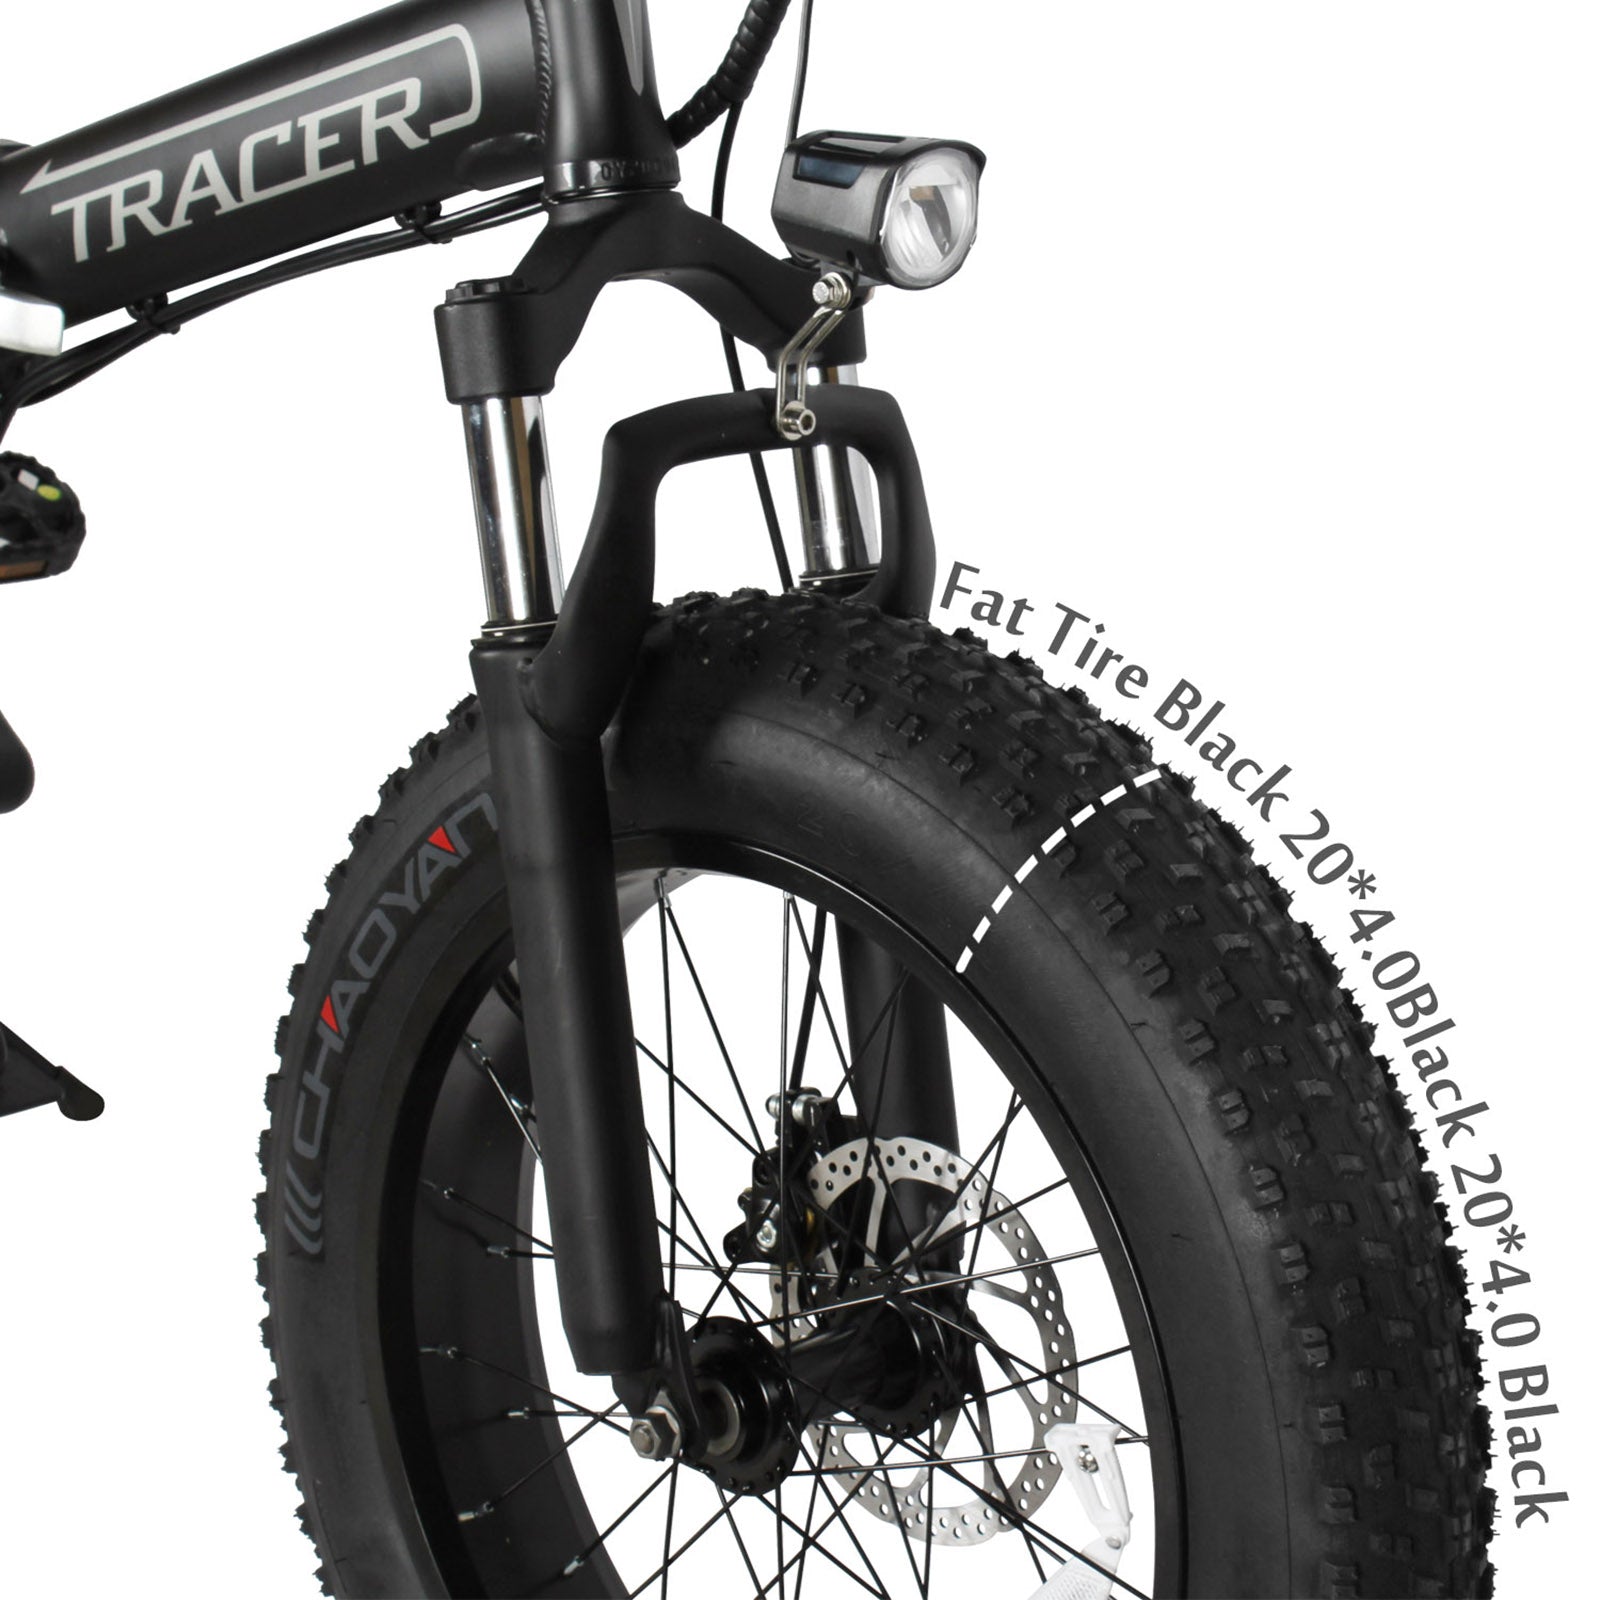 Tracer Coyote 20 Inch 500W Foldable Electric Bike,Shimano RD-TY21 GS 7 speed derailleur, 20''x 4'' fat tire with 160mm disc Brake - Tracer Bikes